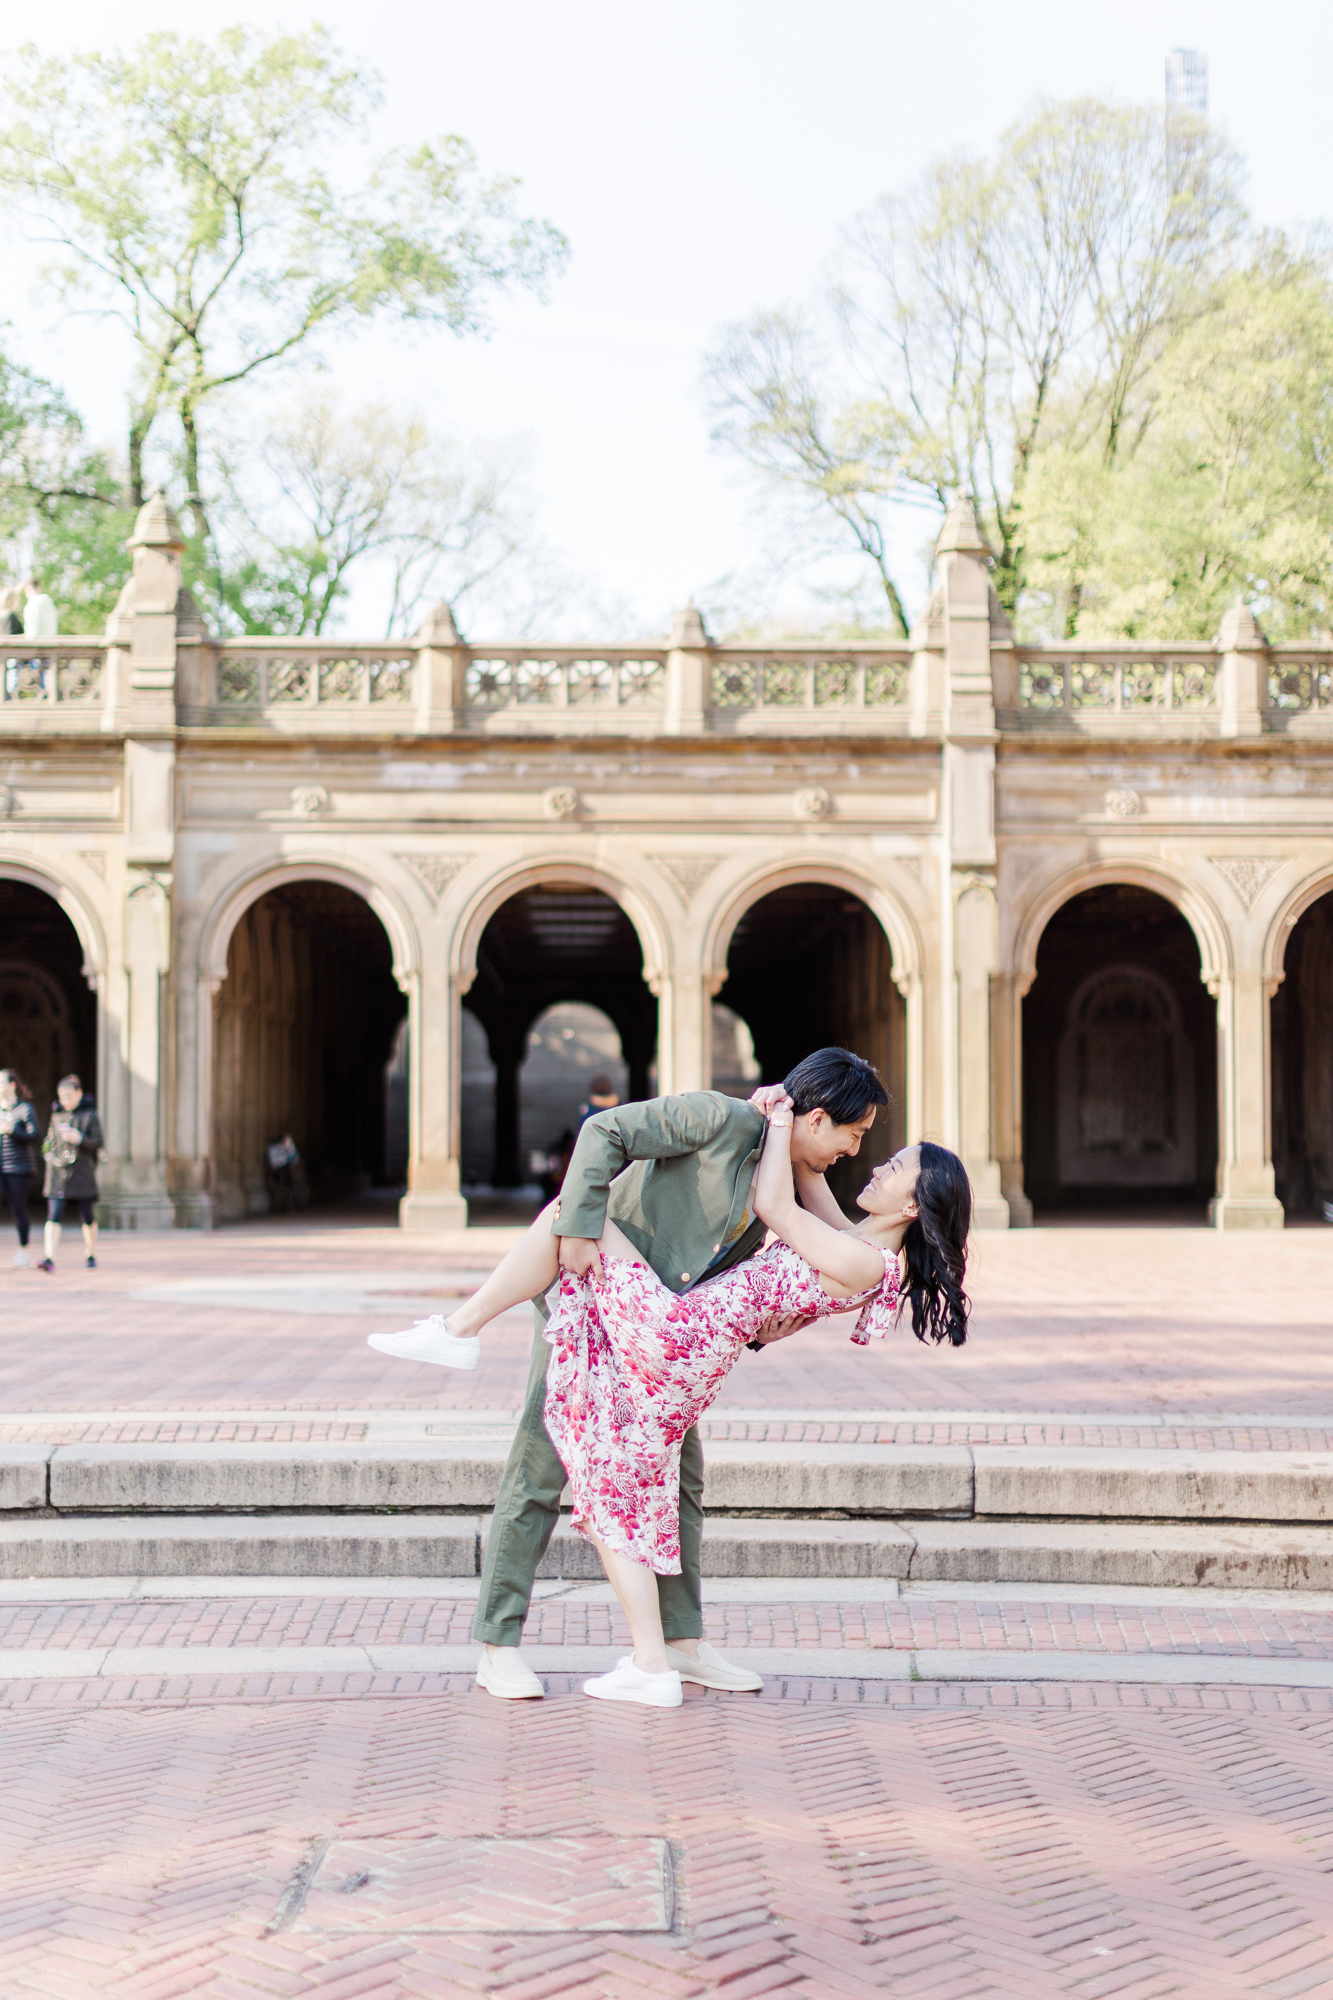 Fun Engagement Photos With Cherry Blossoms in NYC